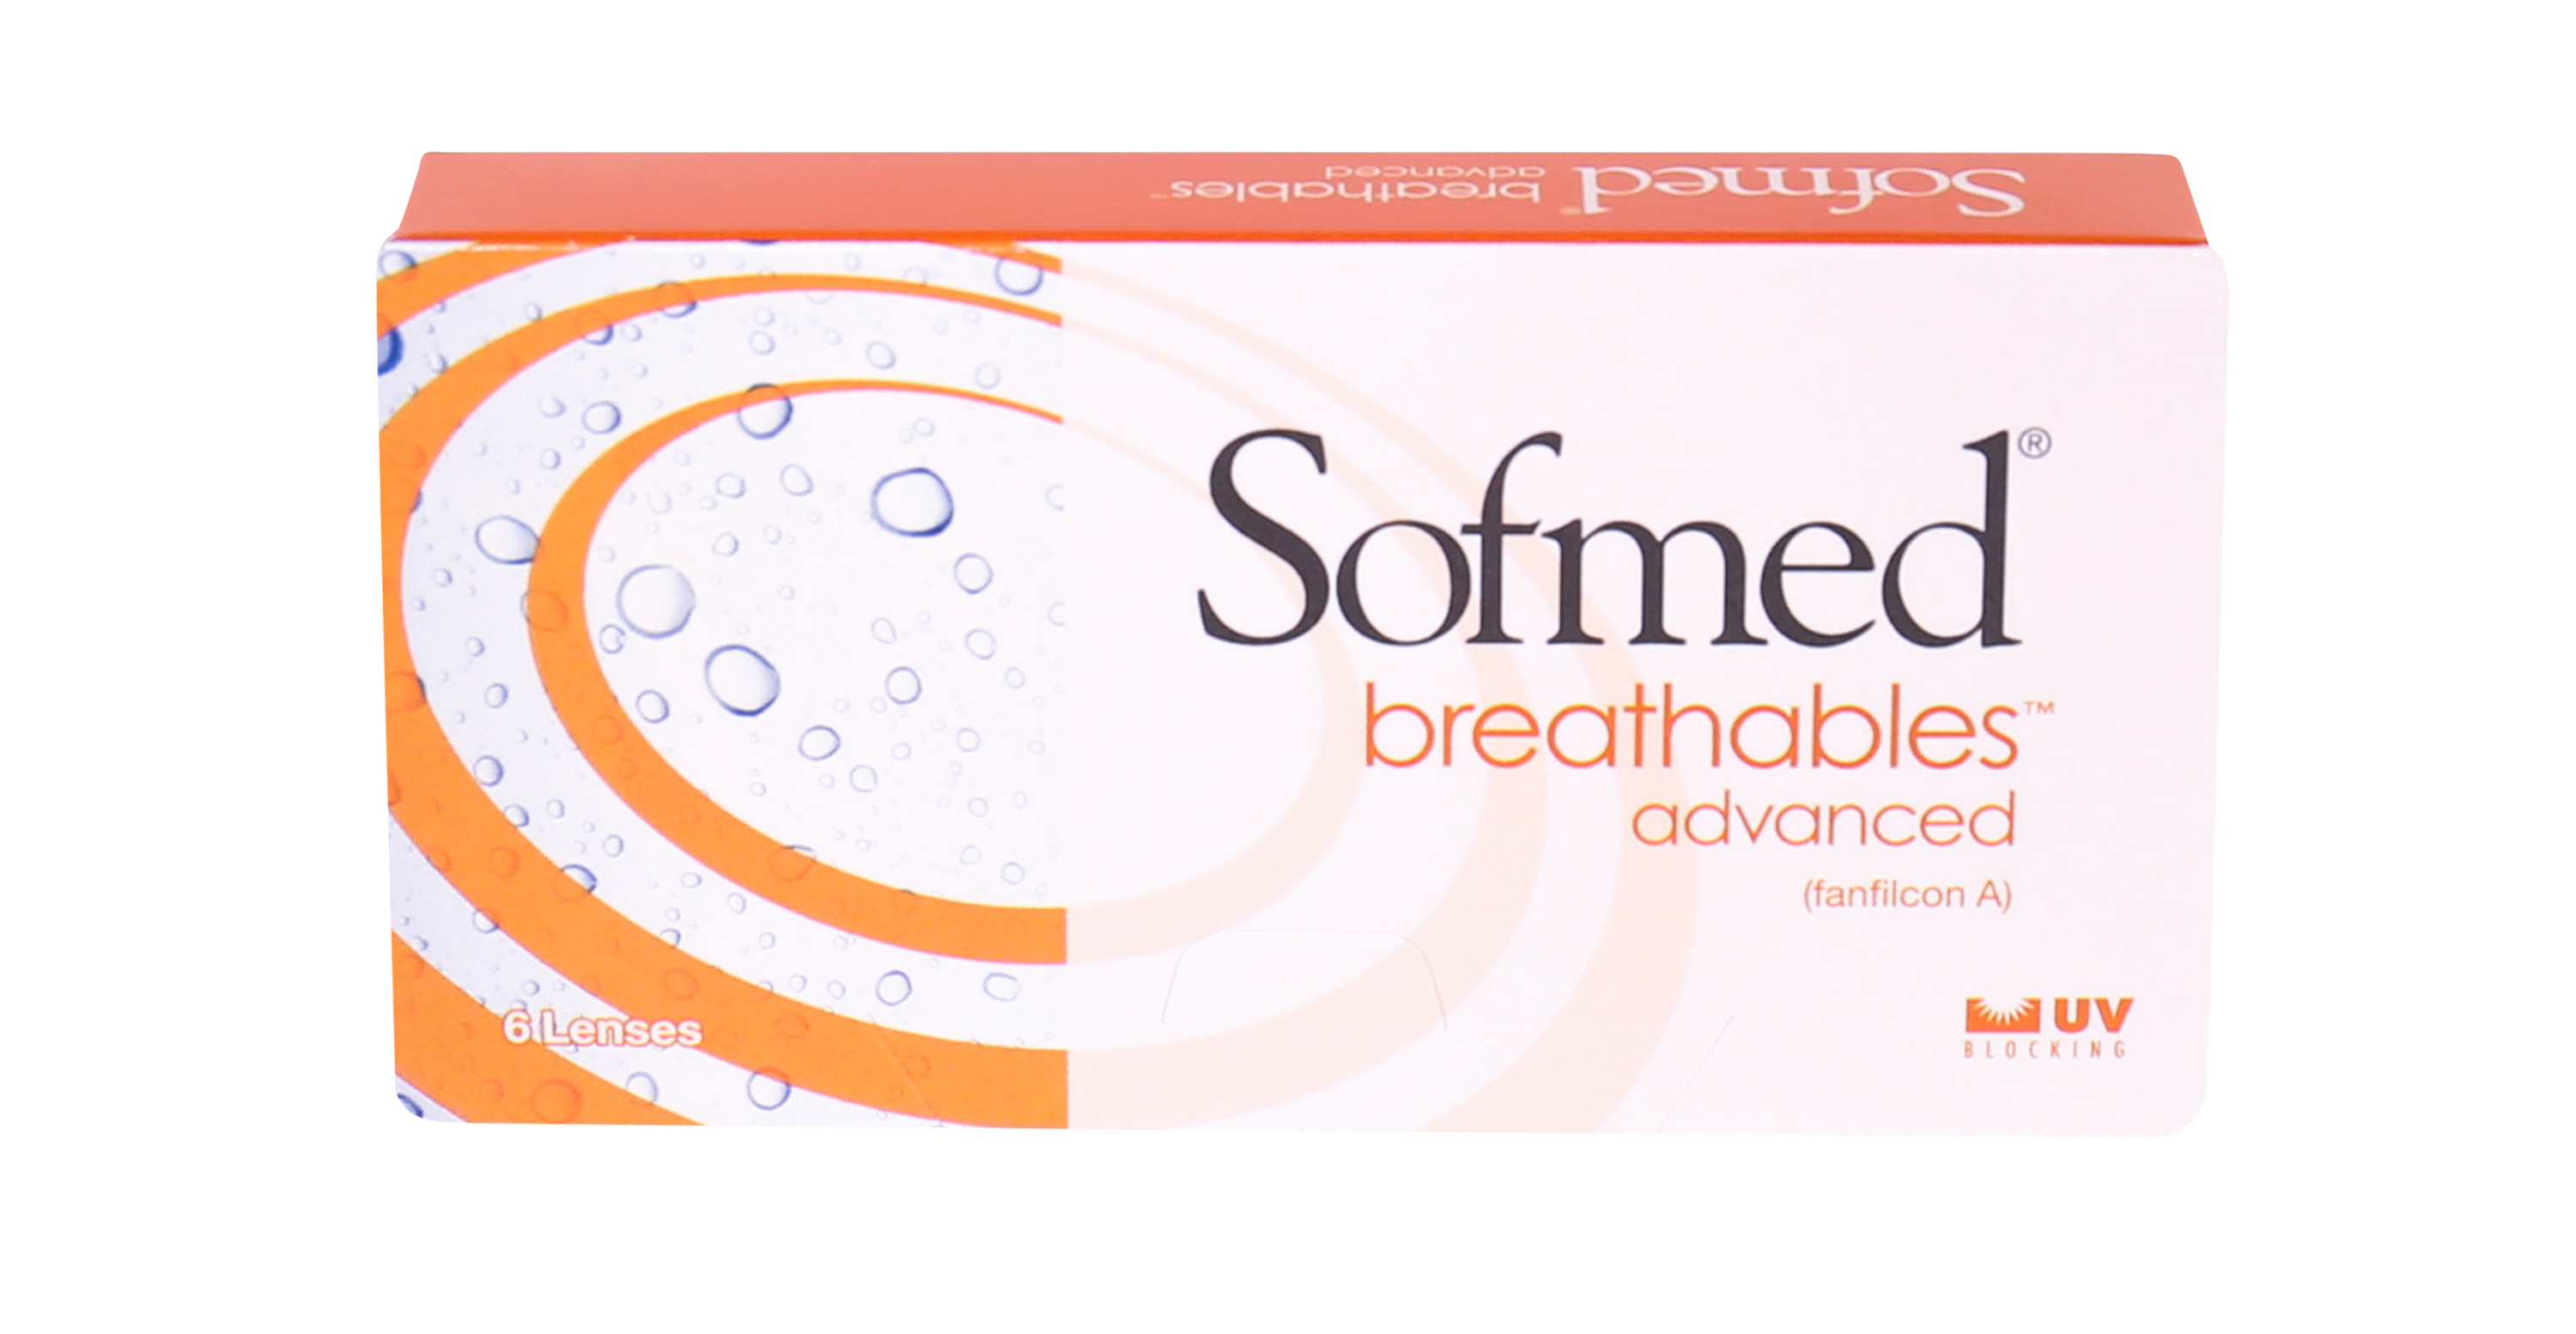 Sofmed breathables advanced 6 Pack large view angle 0